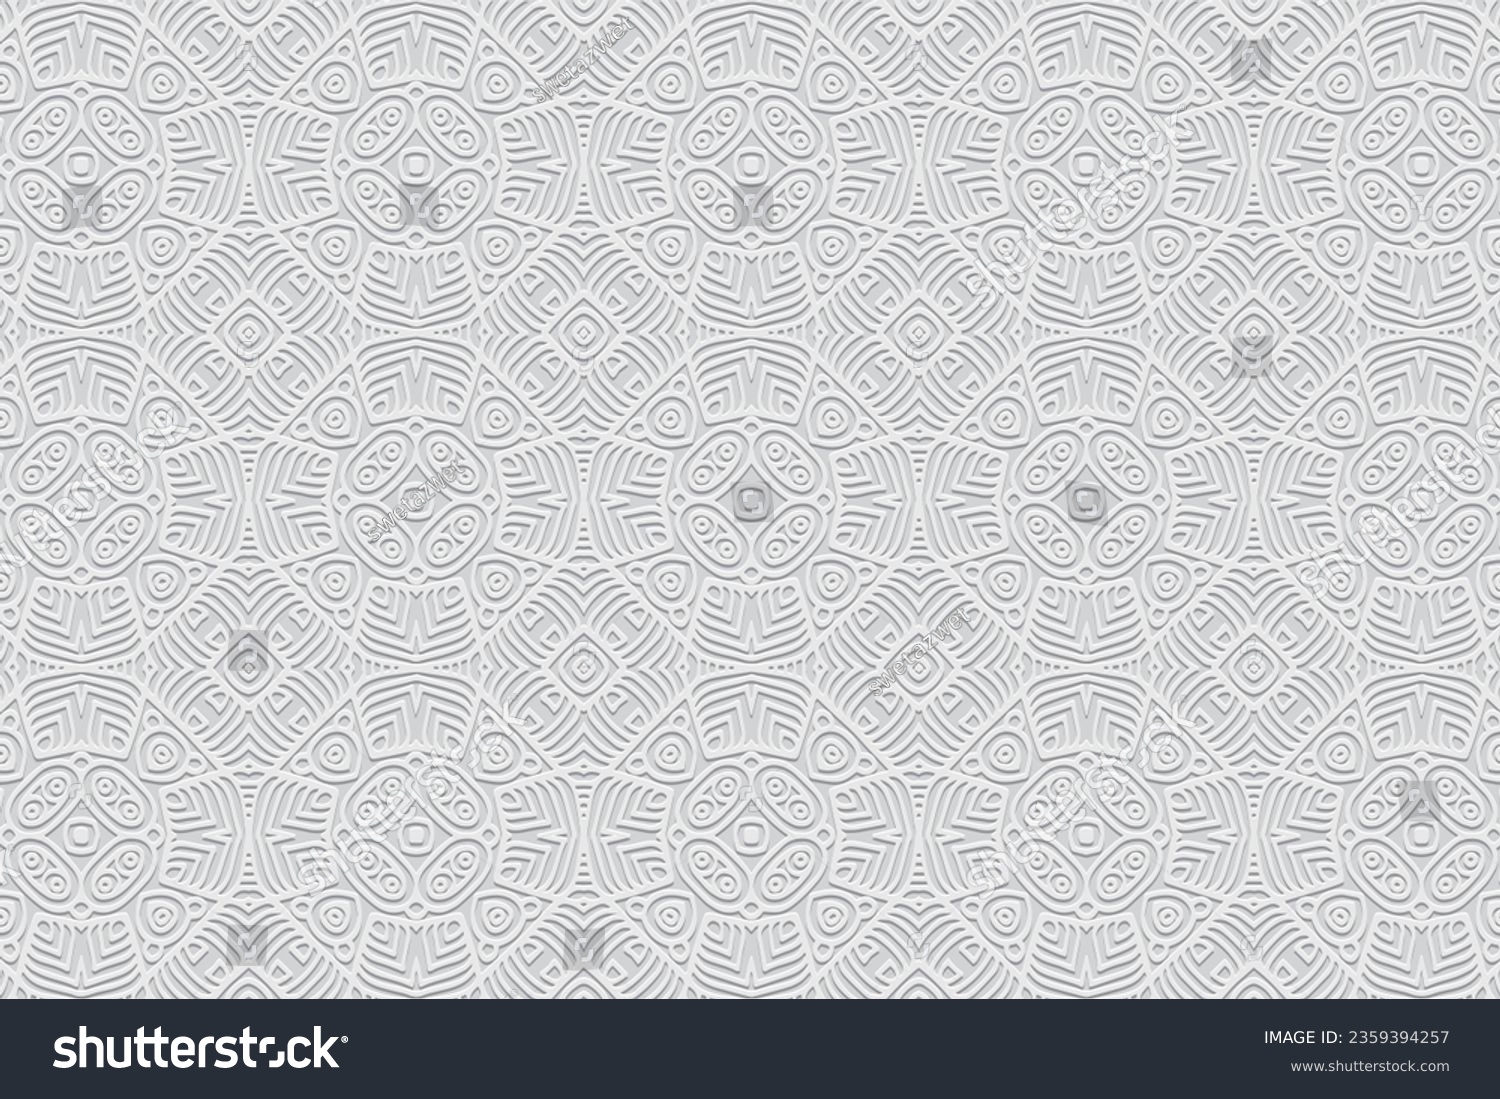 Embossed white background, cover design. Geometric ethnic 3D pattern, press paper, leather. Handmade, stylish work, anti-stress. Boho, tribal minimalist designs of East, Asia, India, Mexico, Aztec #2359394257